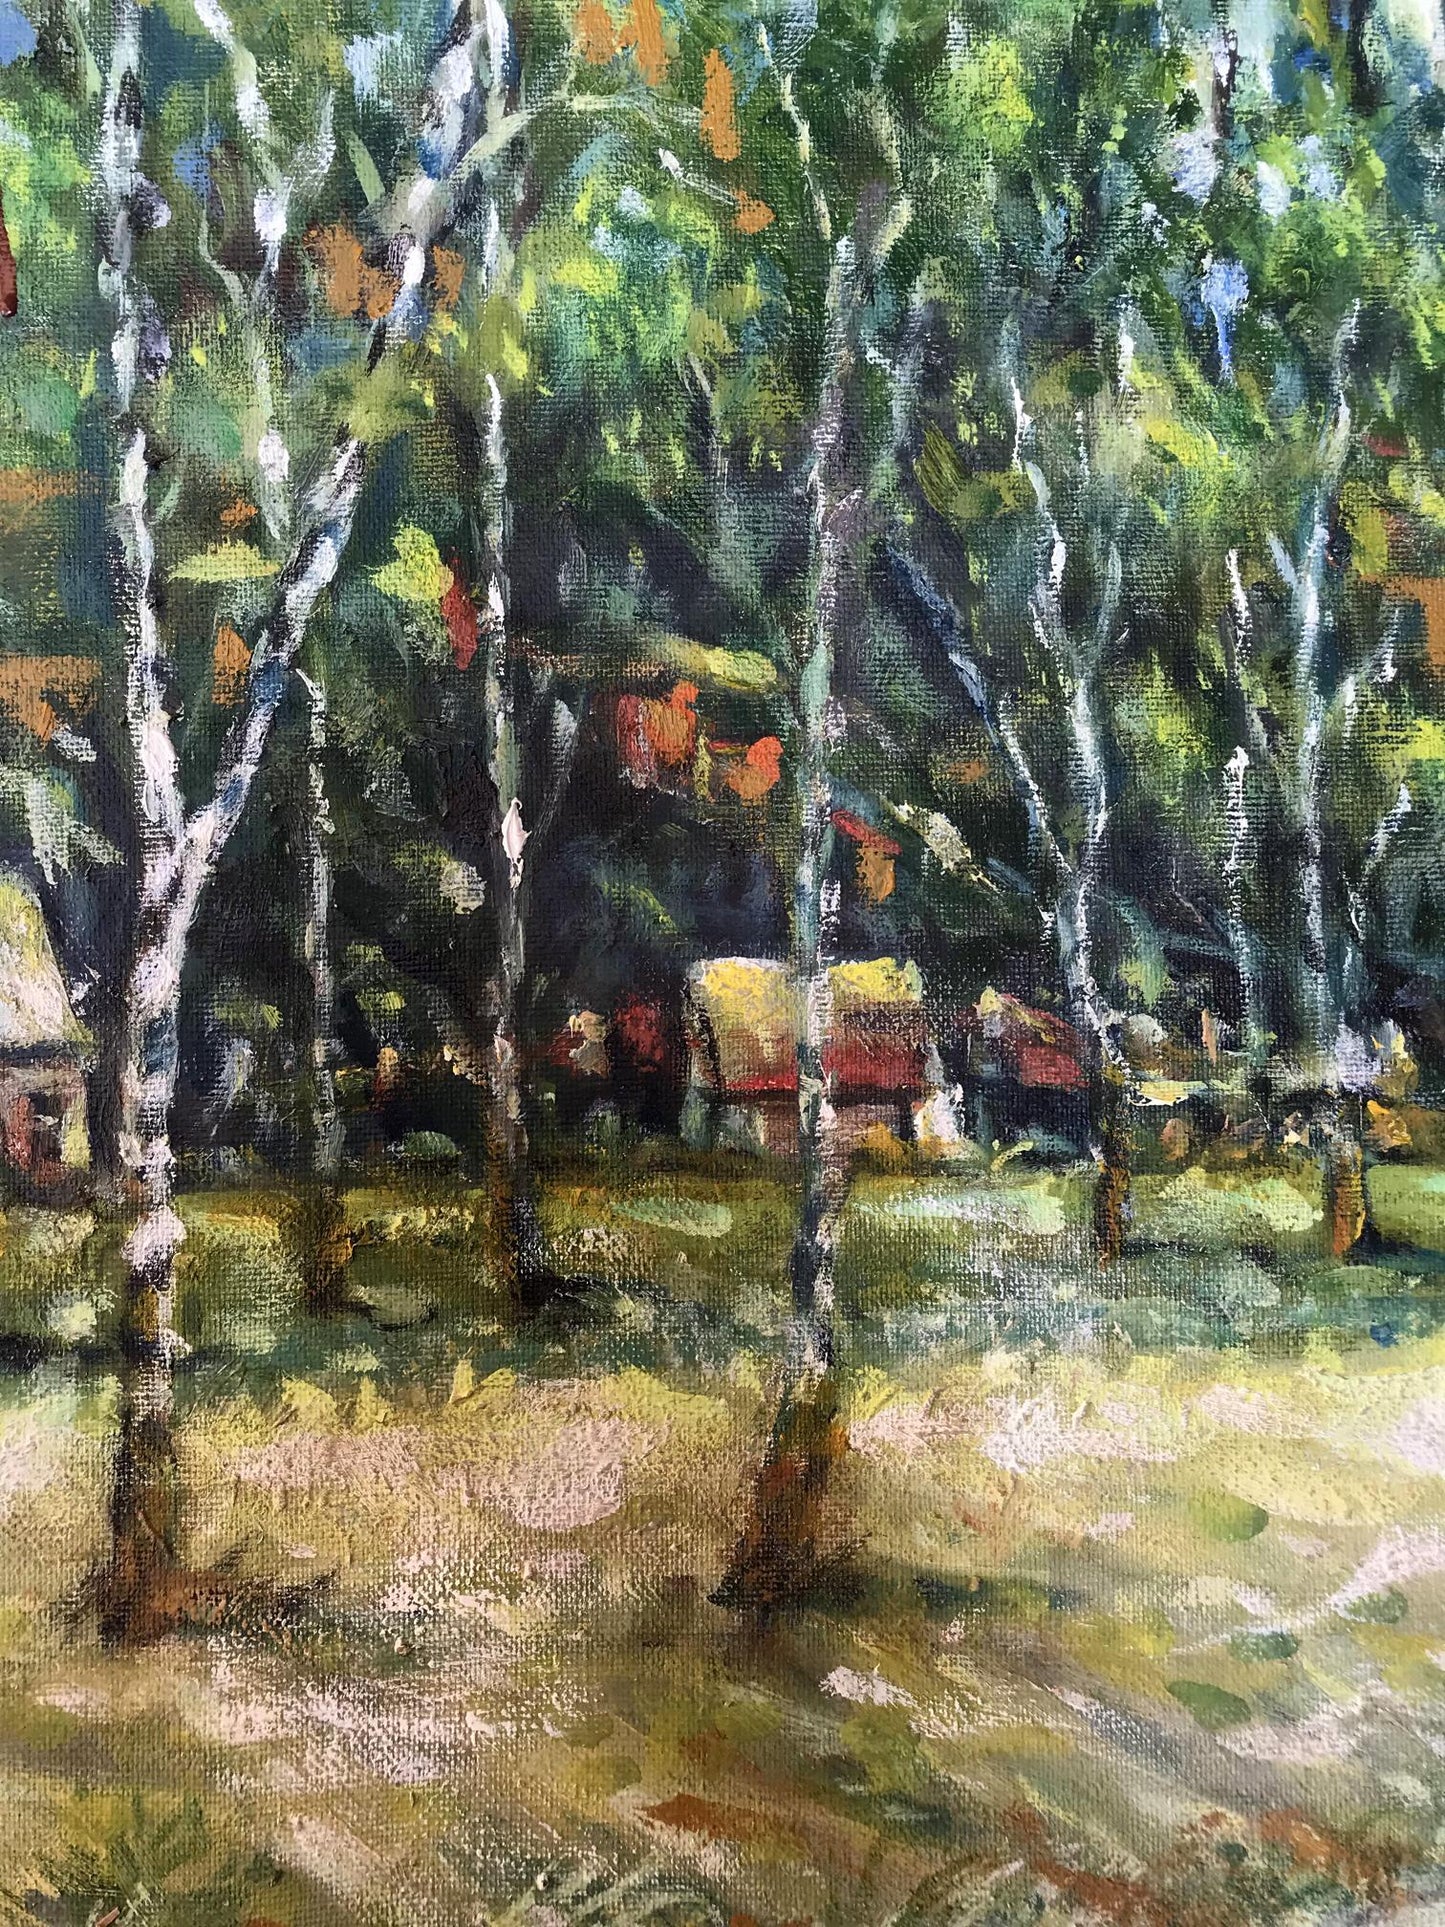 Ivan Leontyevich Shapoval's oil painting captures the essence of Sumy's birch trees